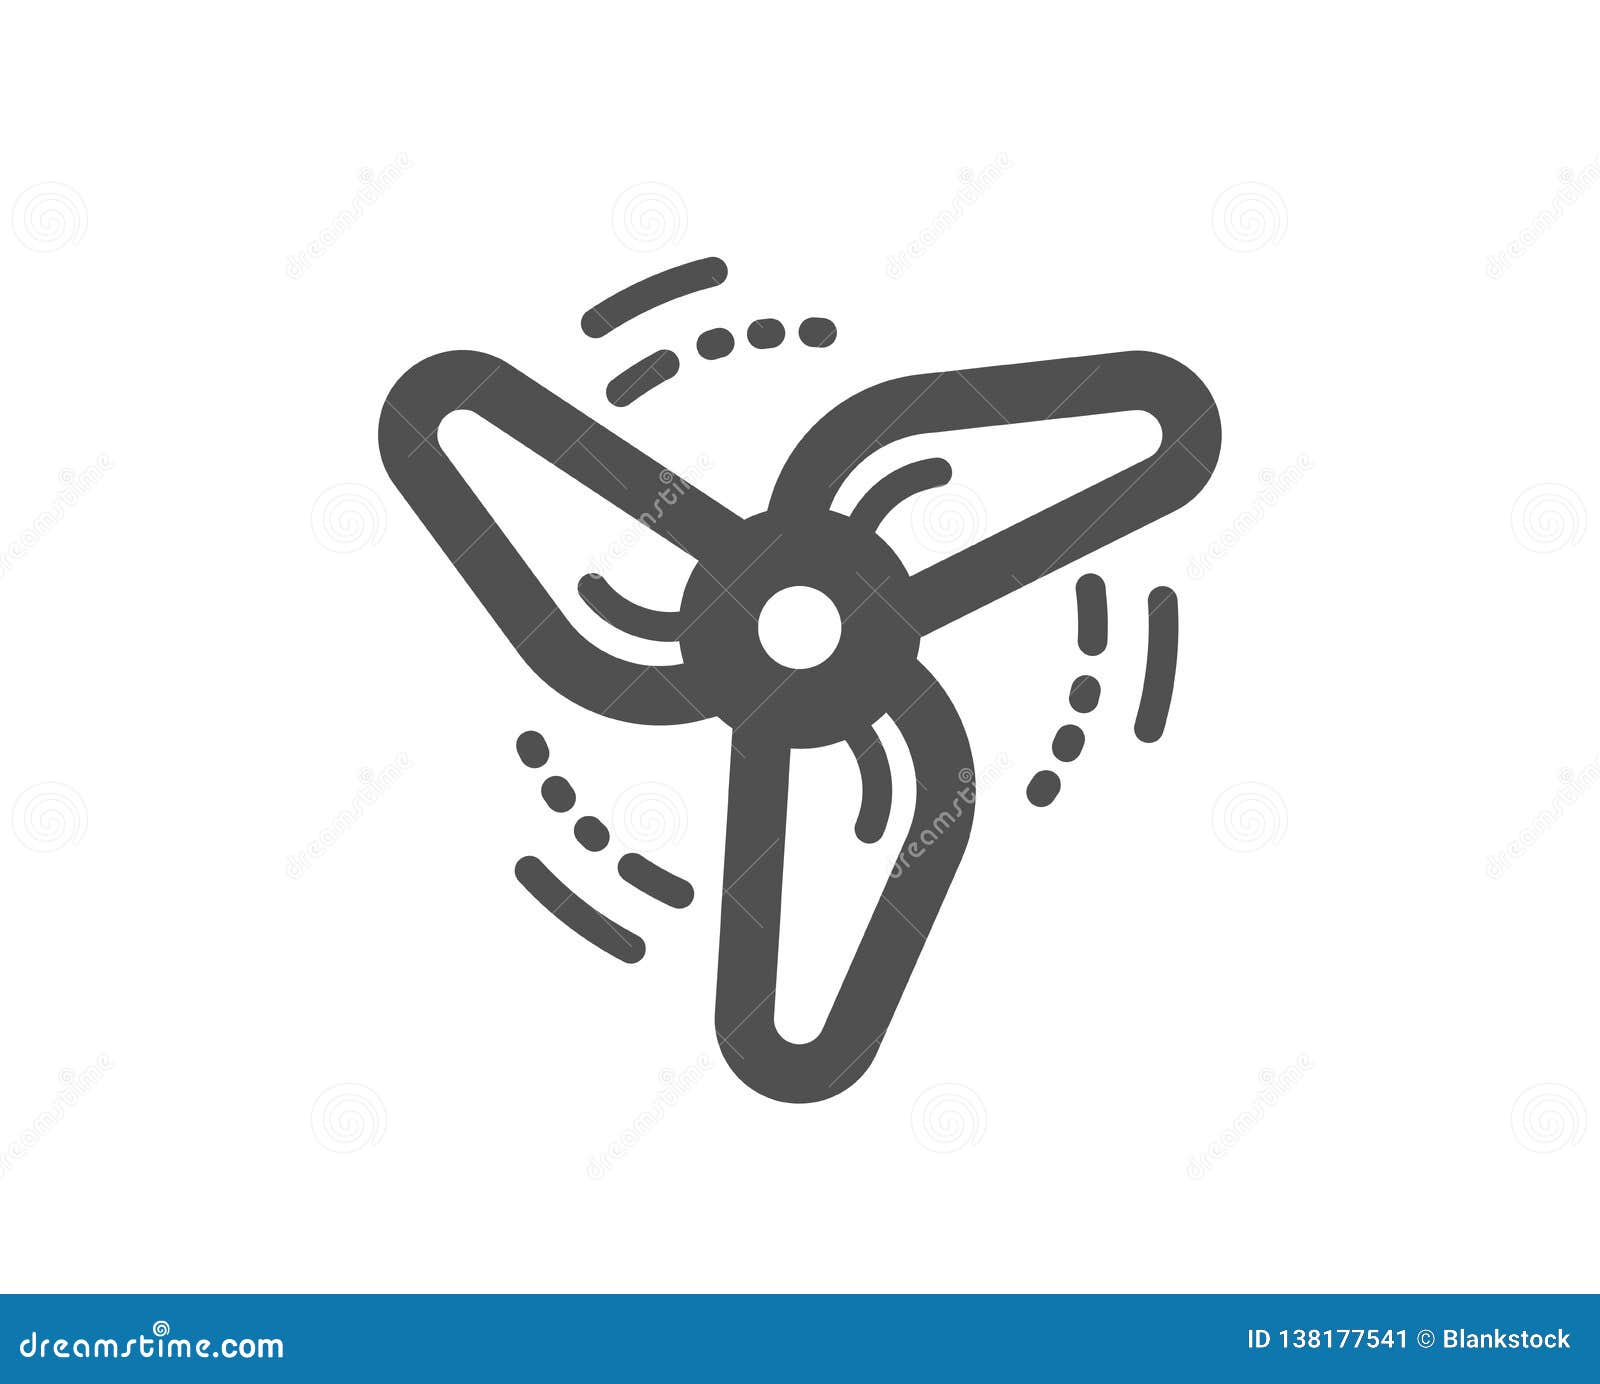 Web stock vector. Illustration of icon, simple, blade - 138177541